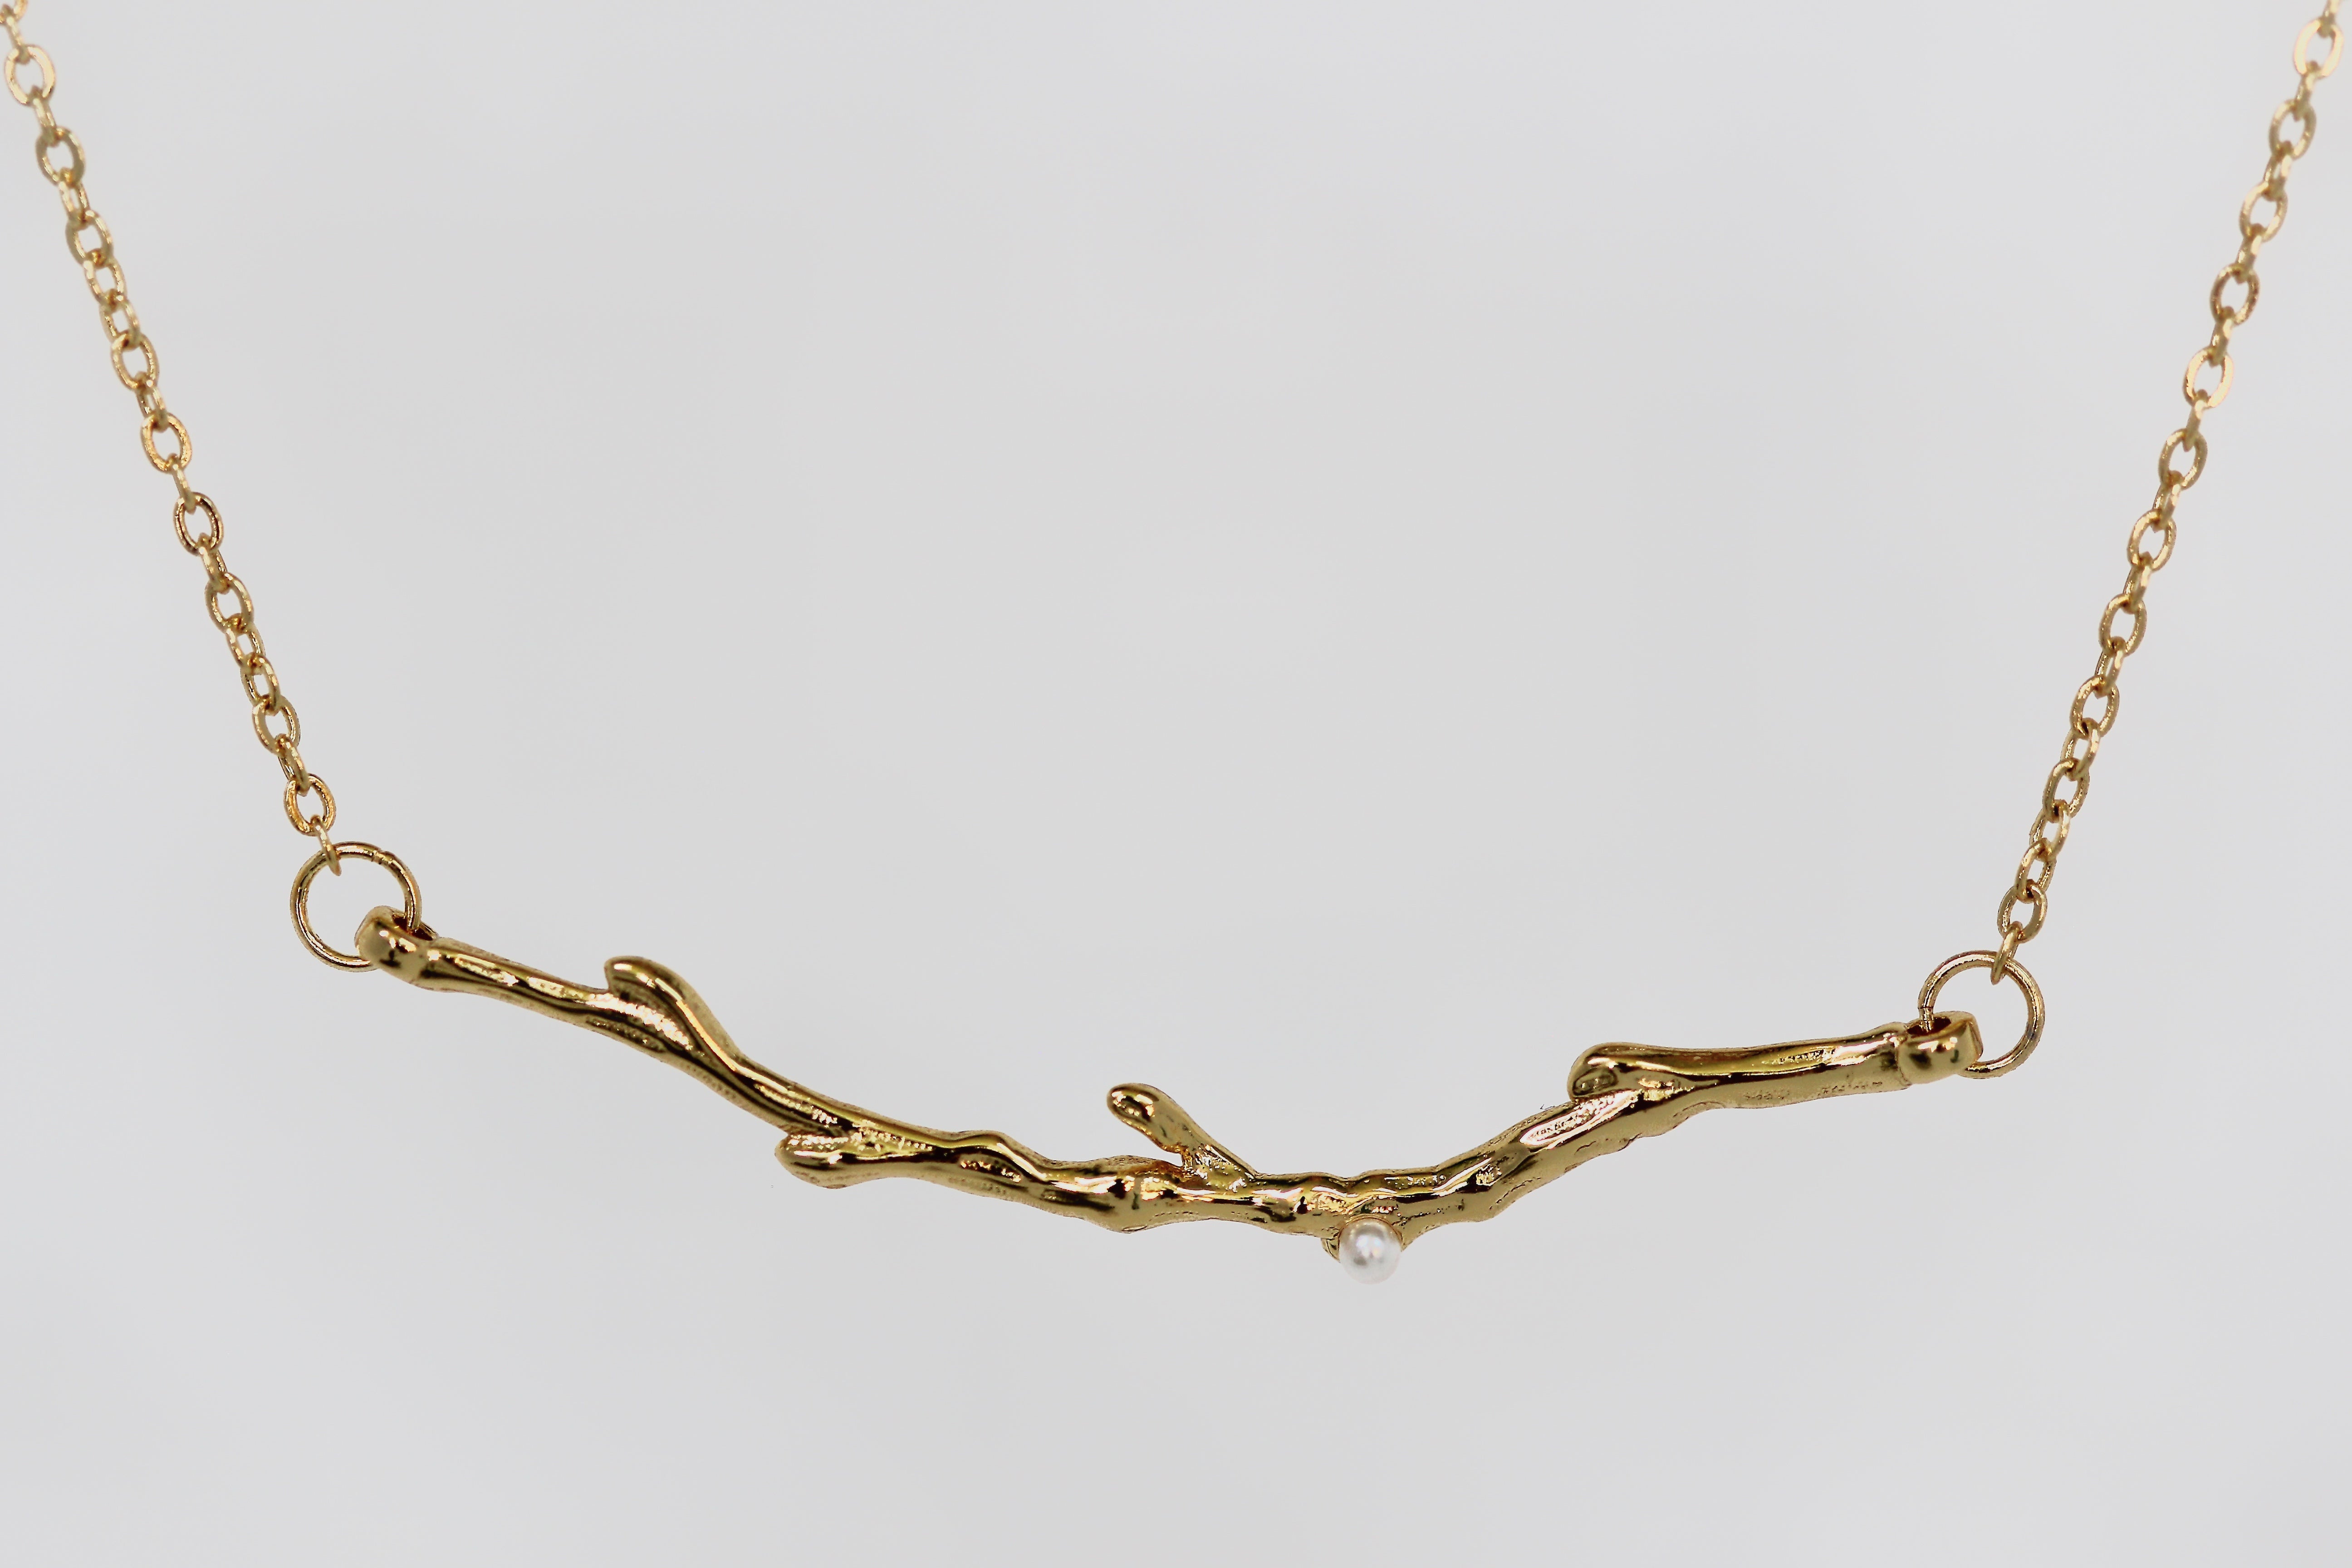 Rustic Branch with Pearls Necklace